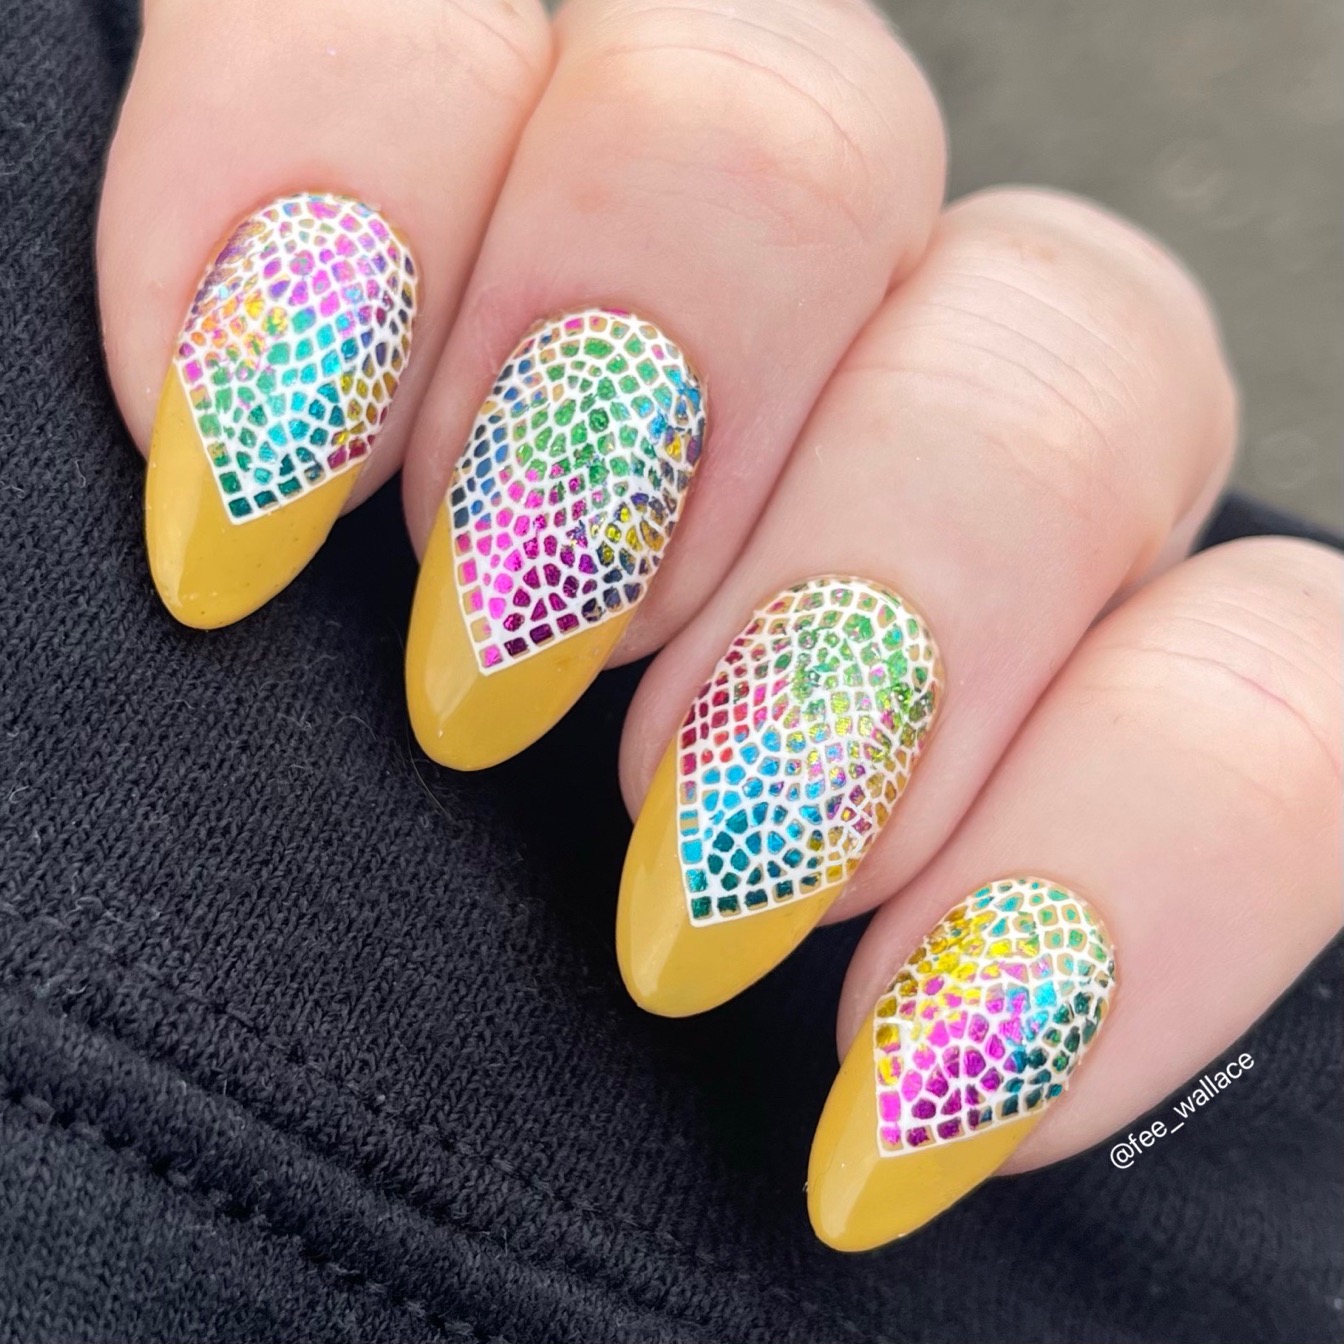 SHINING MOSAIC NAIL DESIGN USING THE CND SUMMER COLLECTION